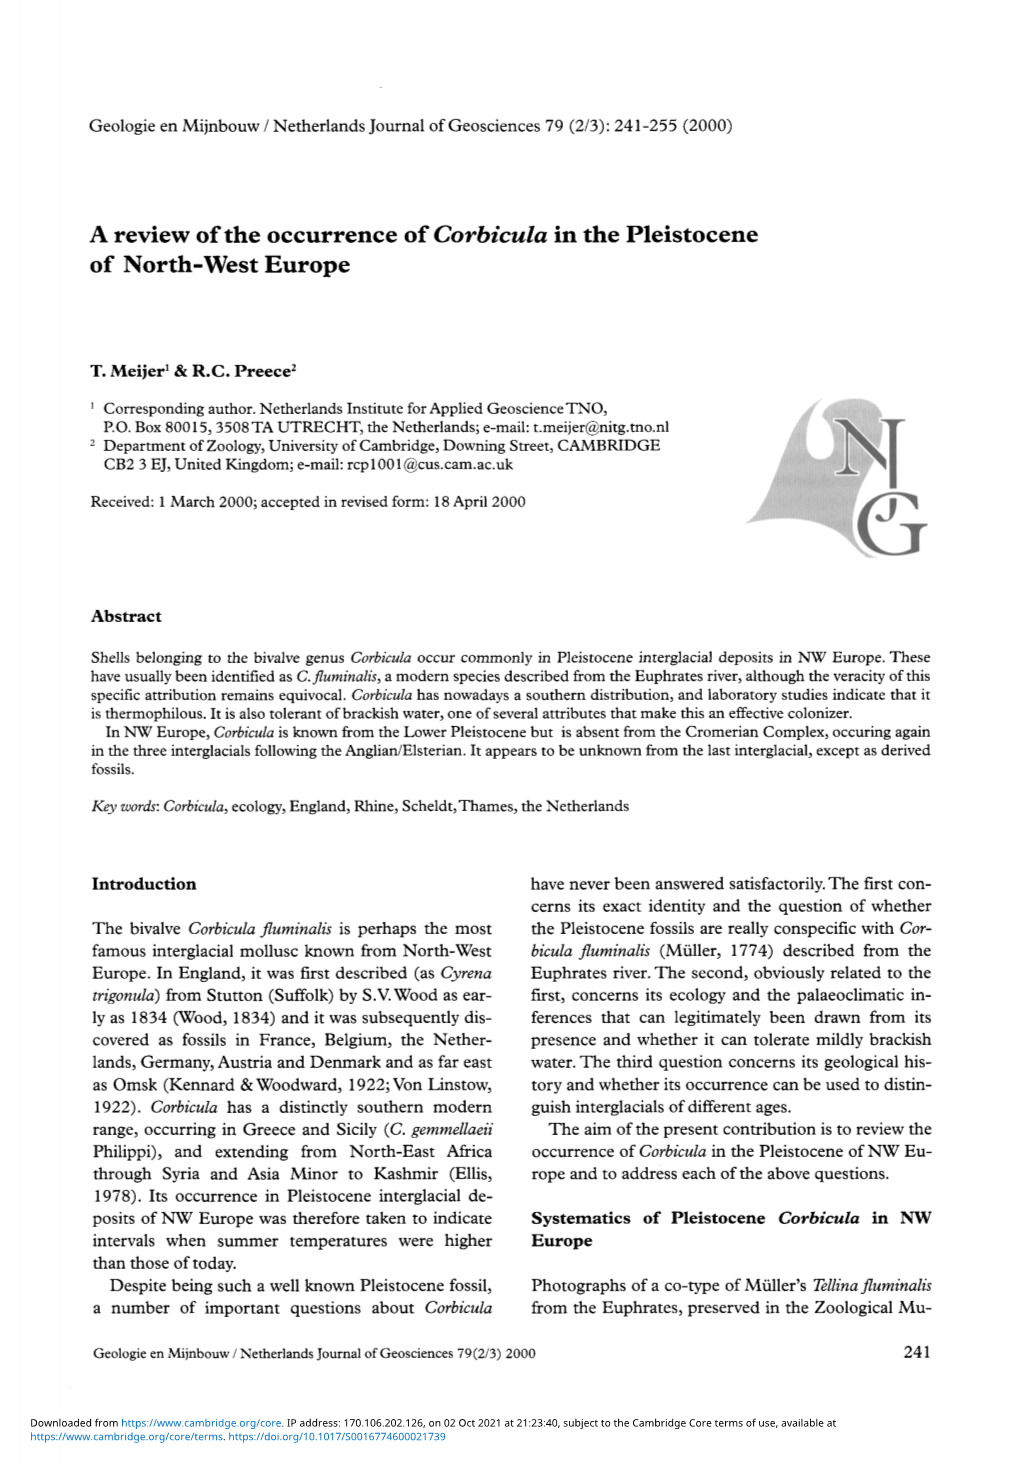 A Review of the Occurrence of Corbicula in the Pleistocene of North-West Europe